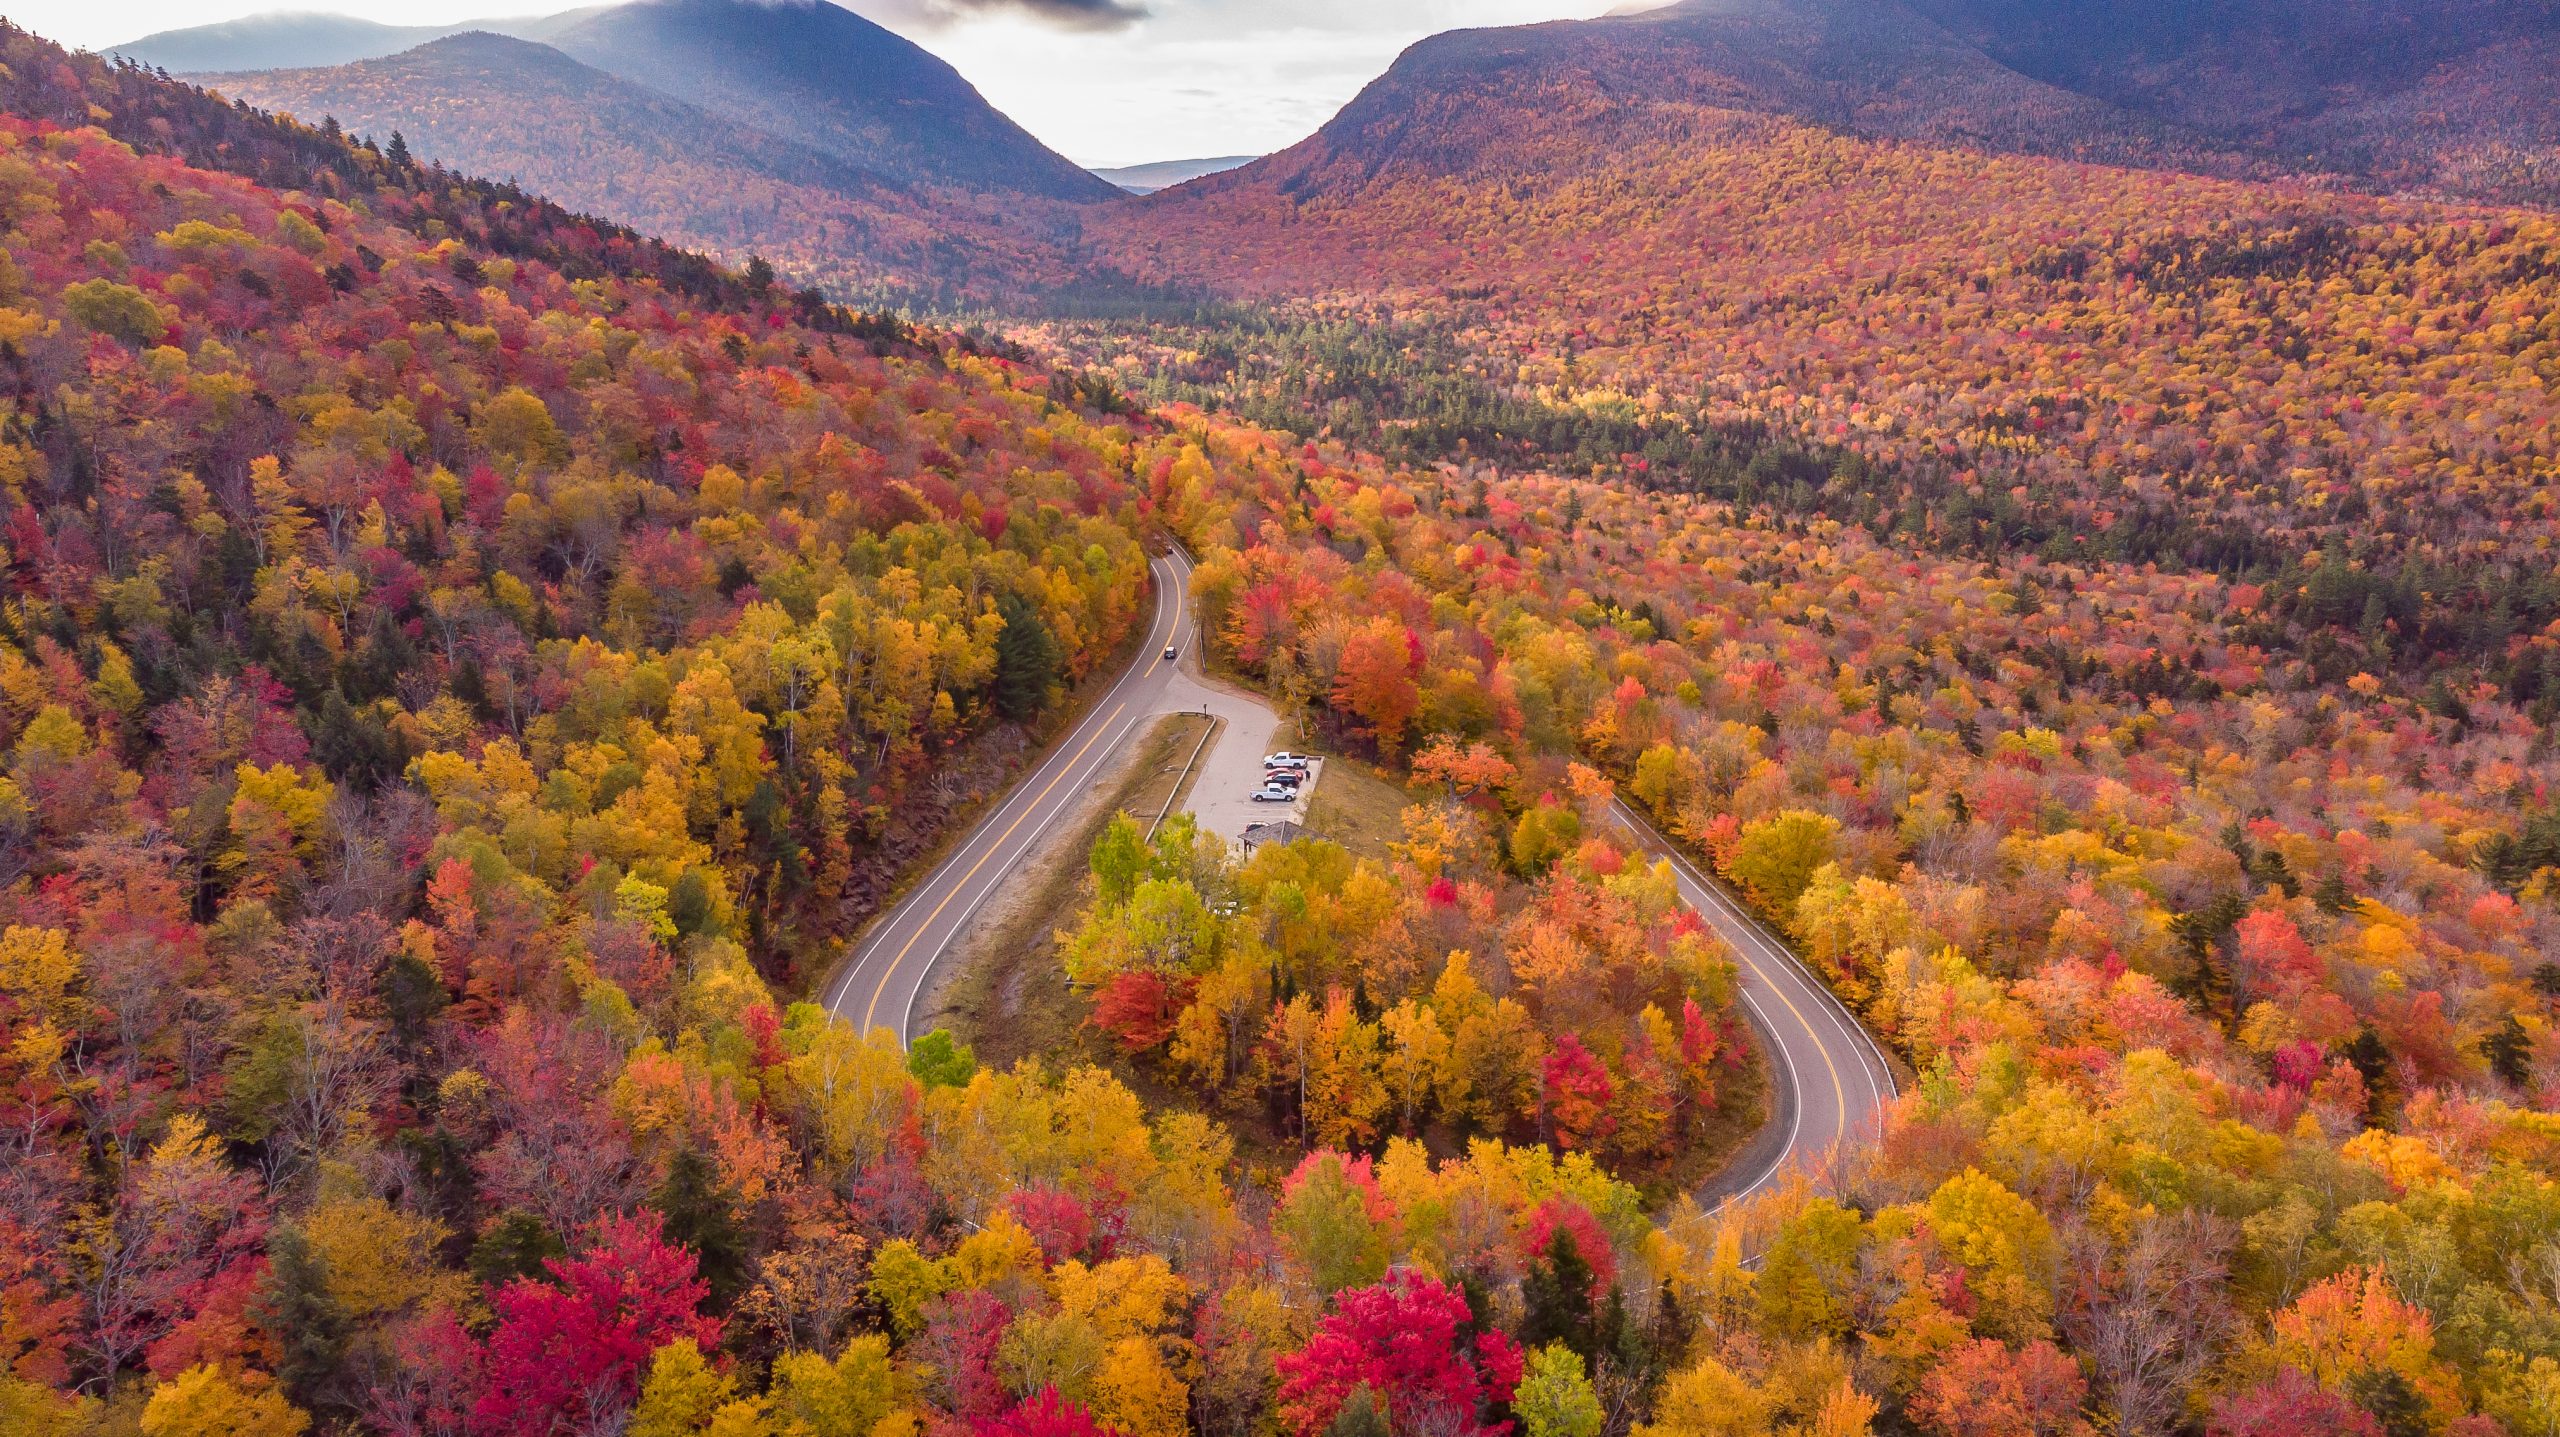 Kancamagus Highway, New Hampshire - Places to Visit in New England